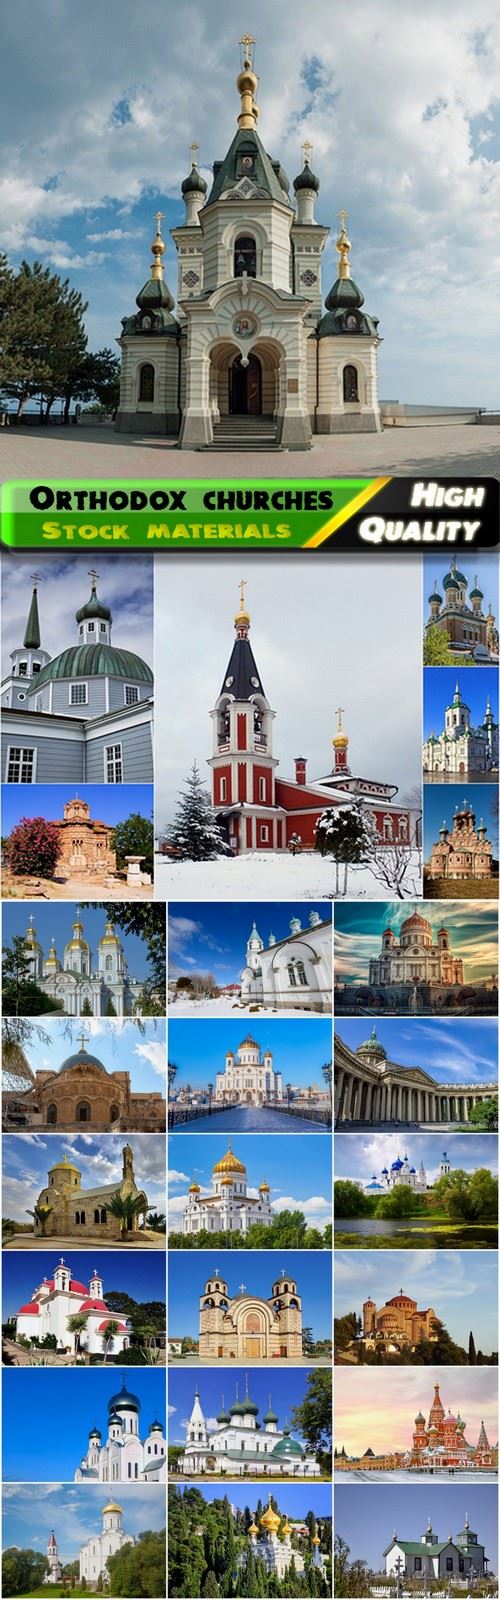 Exteriors of different Orthodox churches - 25 HQ Jpg